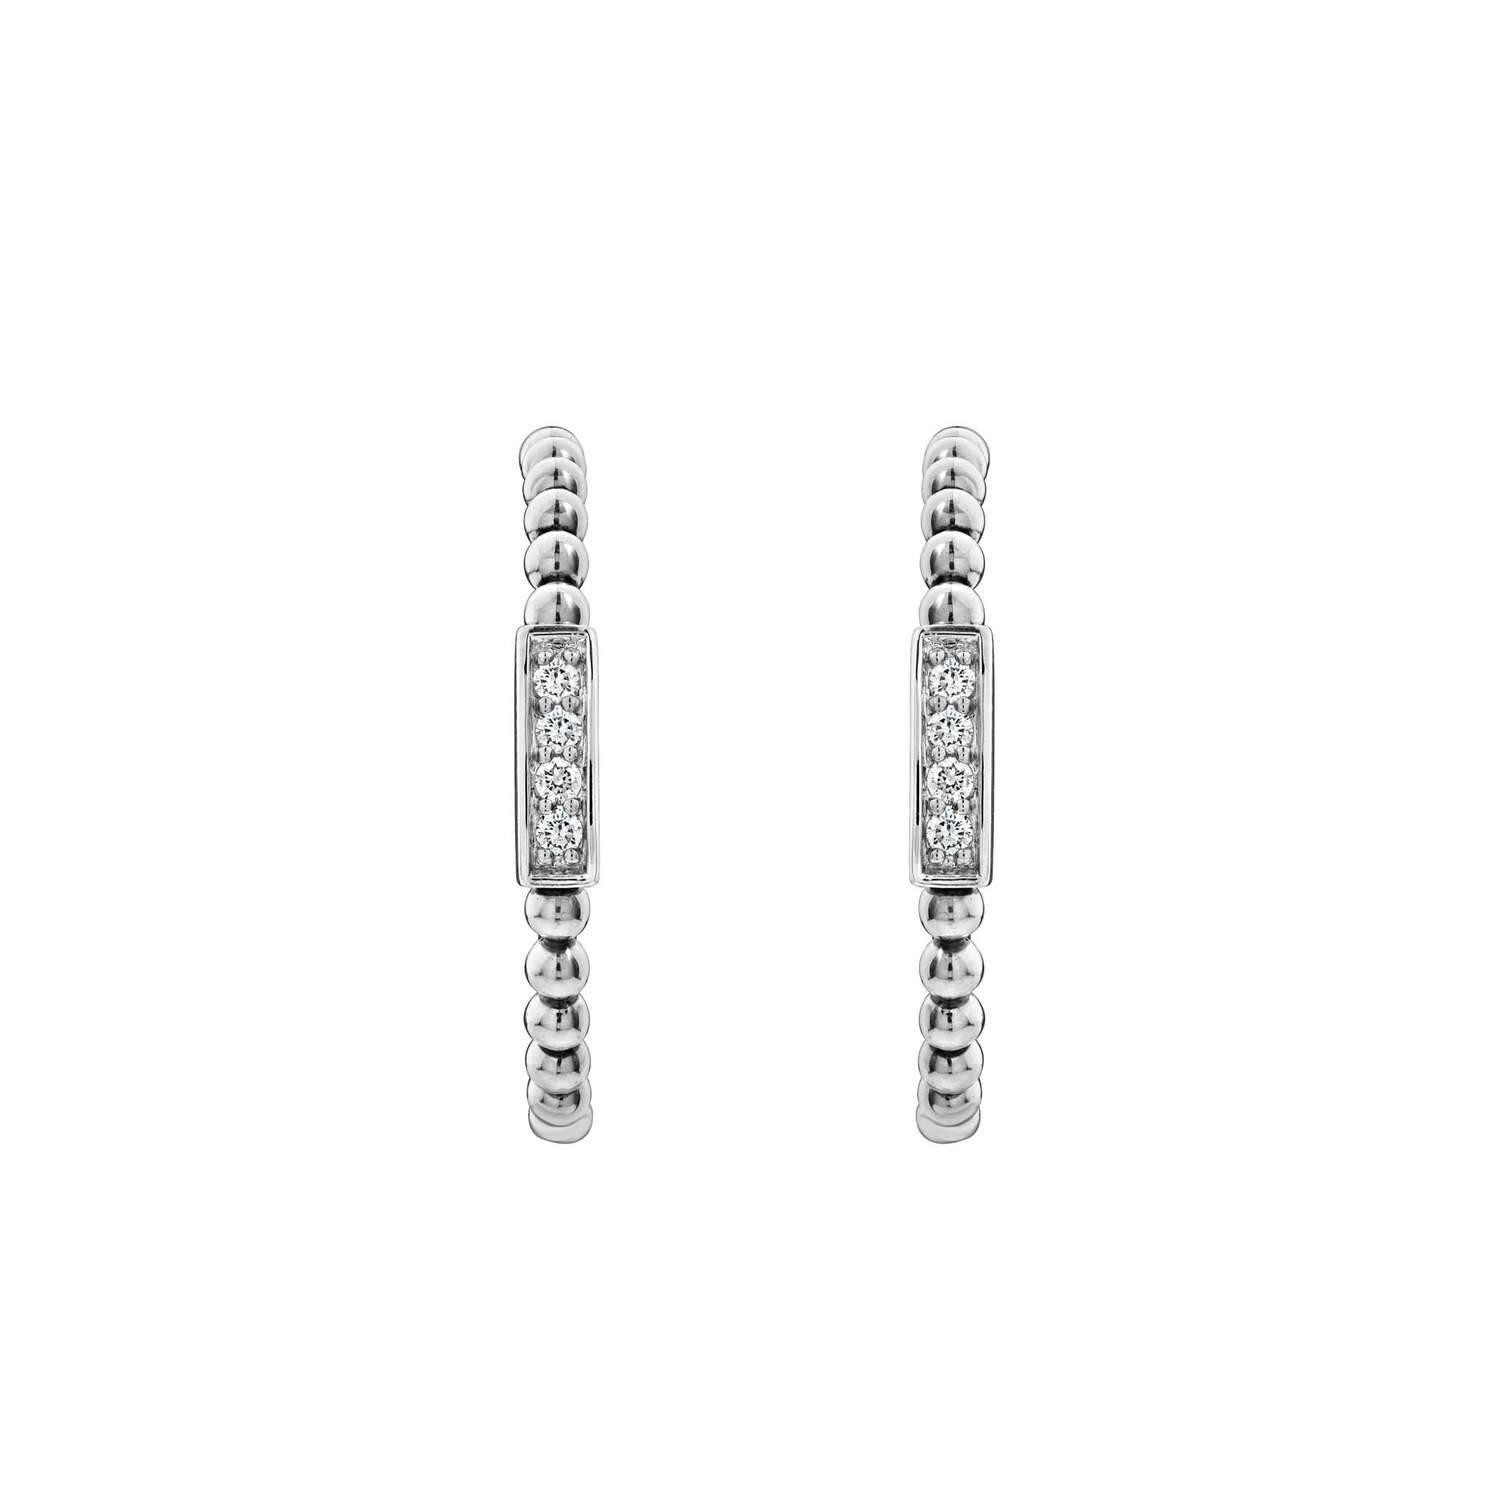 Diamond hoop earrings with sterling silver Caviar beading. Finished with 14k gold post backing.